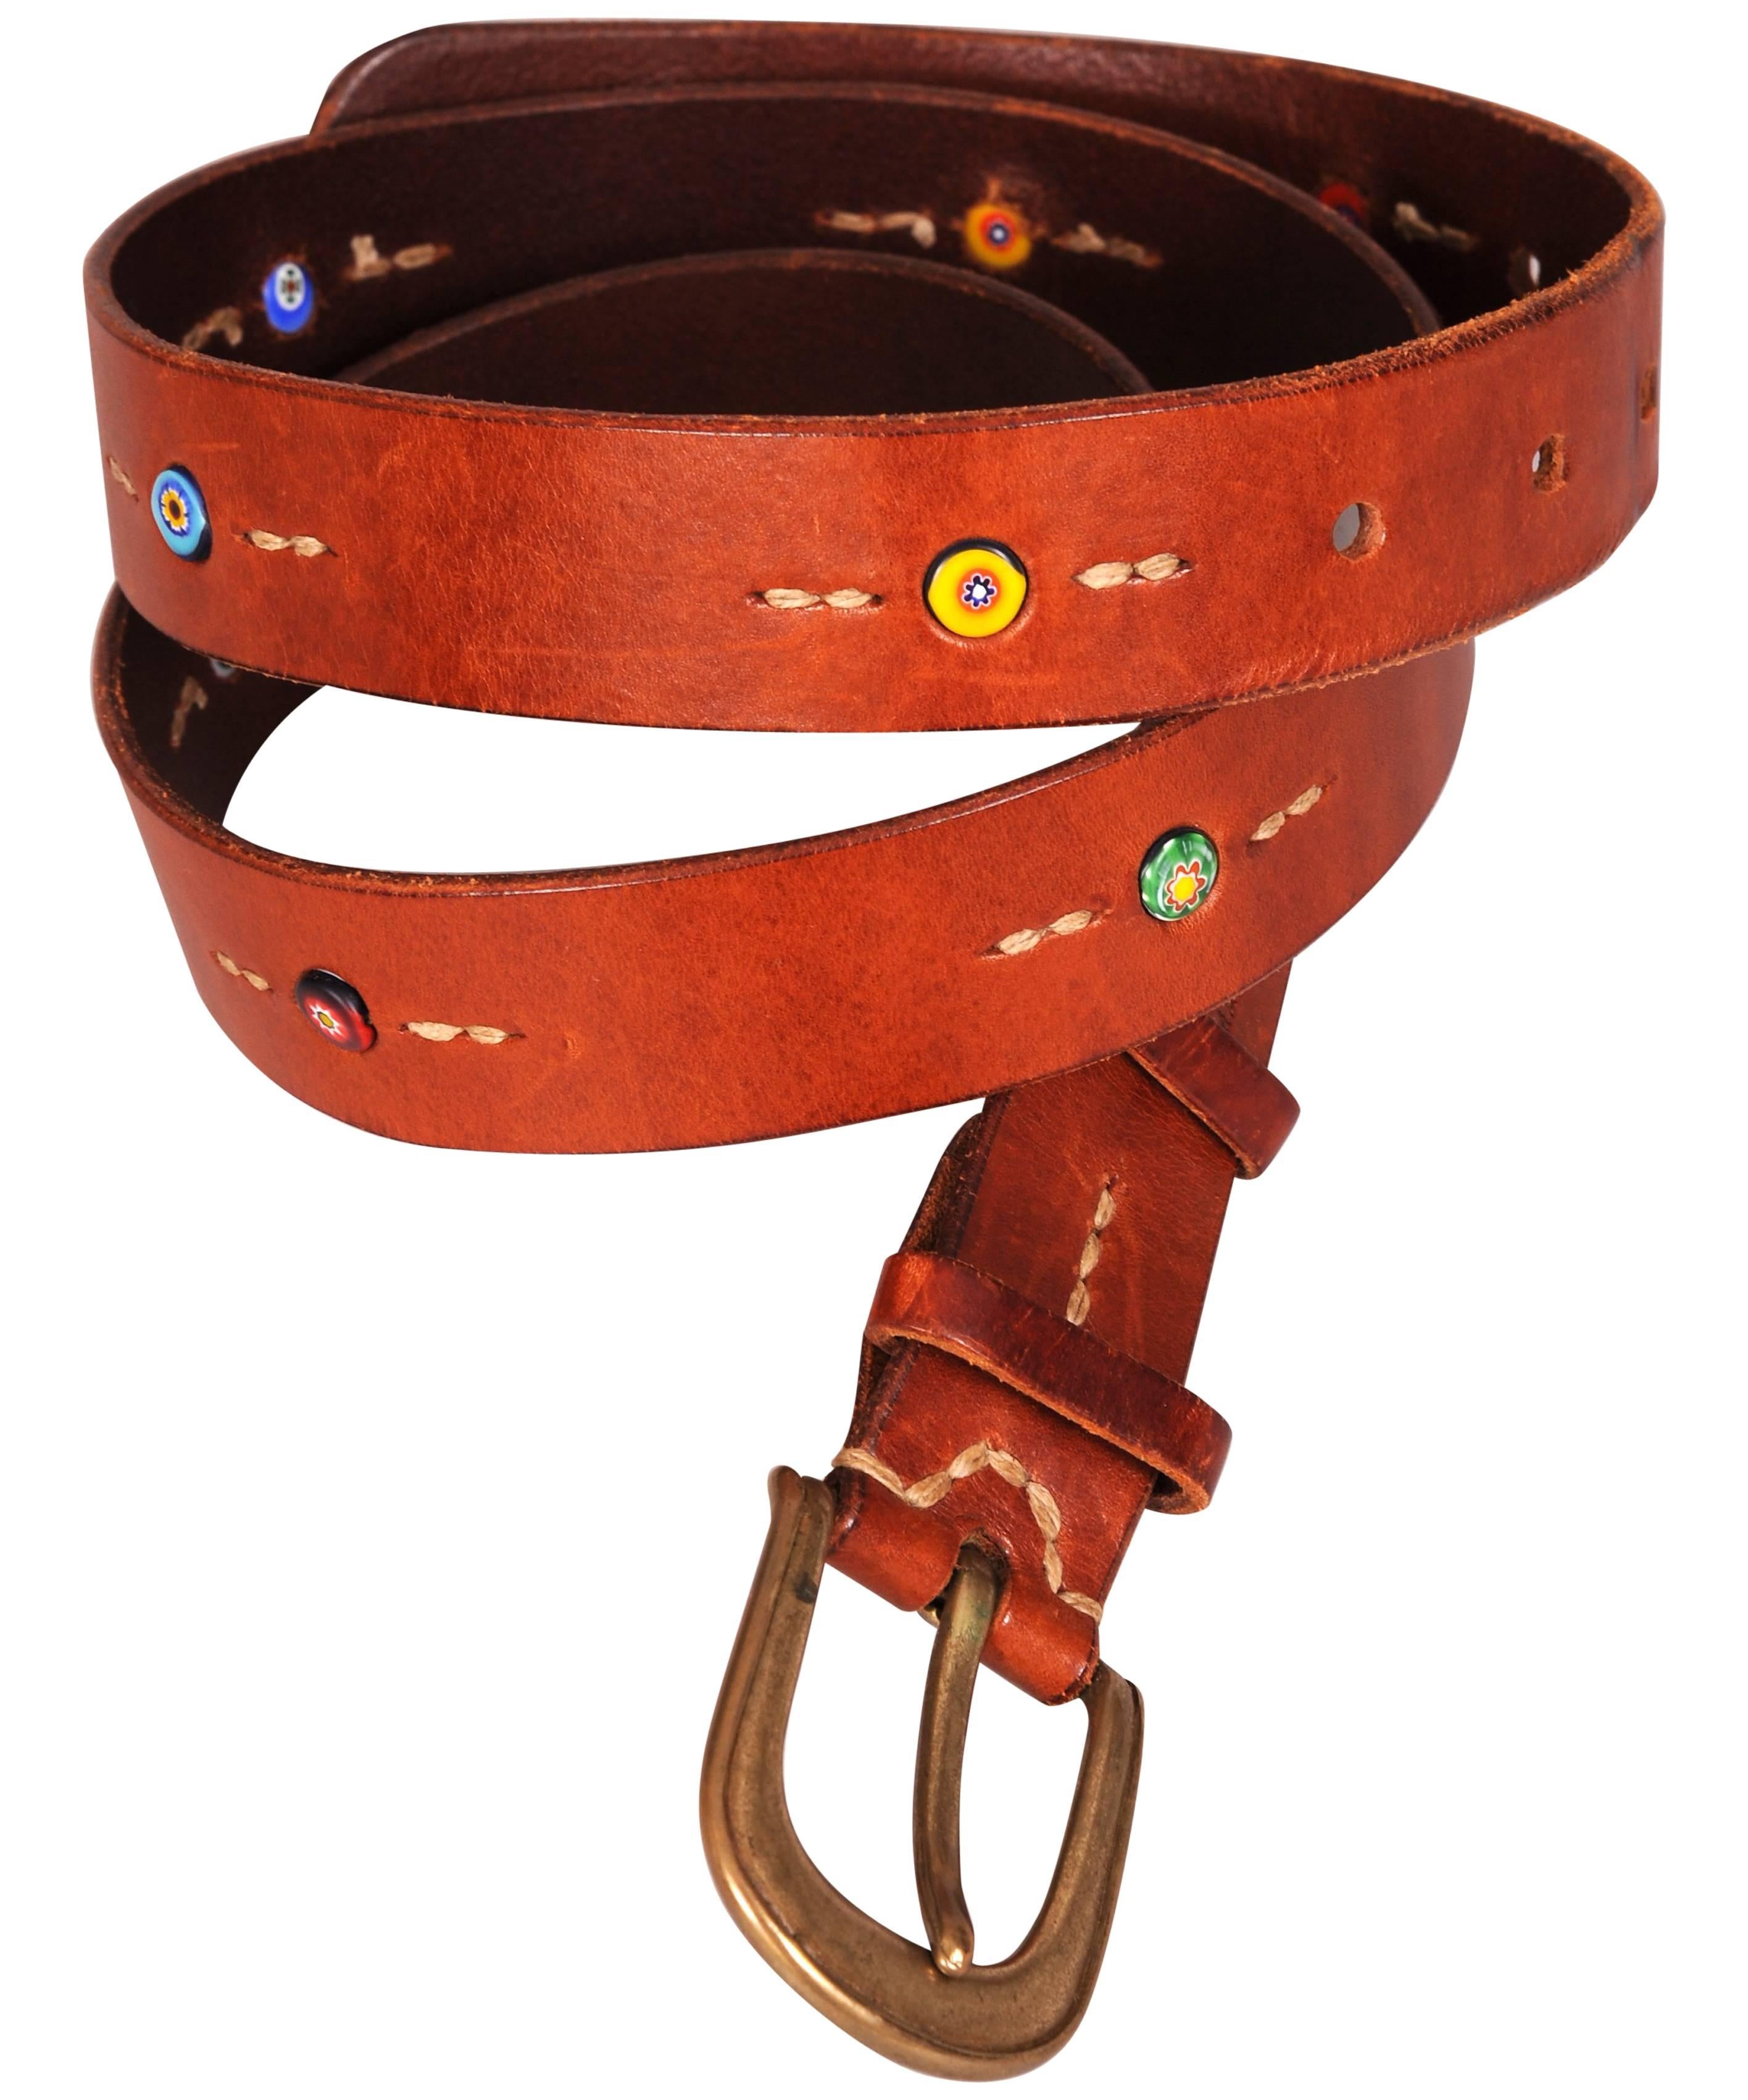 Henry Beguelin Buckle and Leather Belt with Millefiori Beads